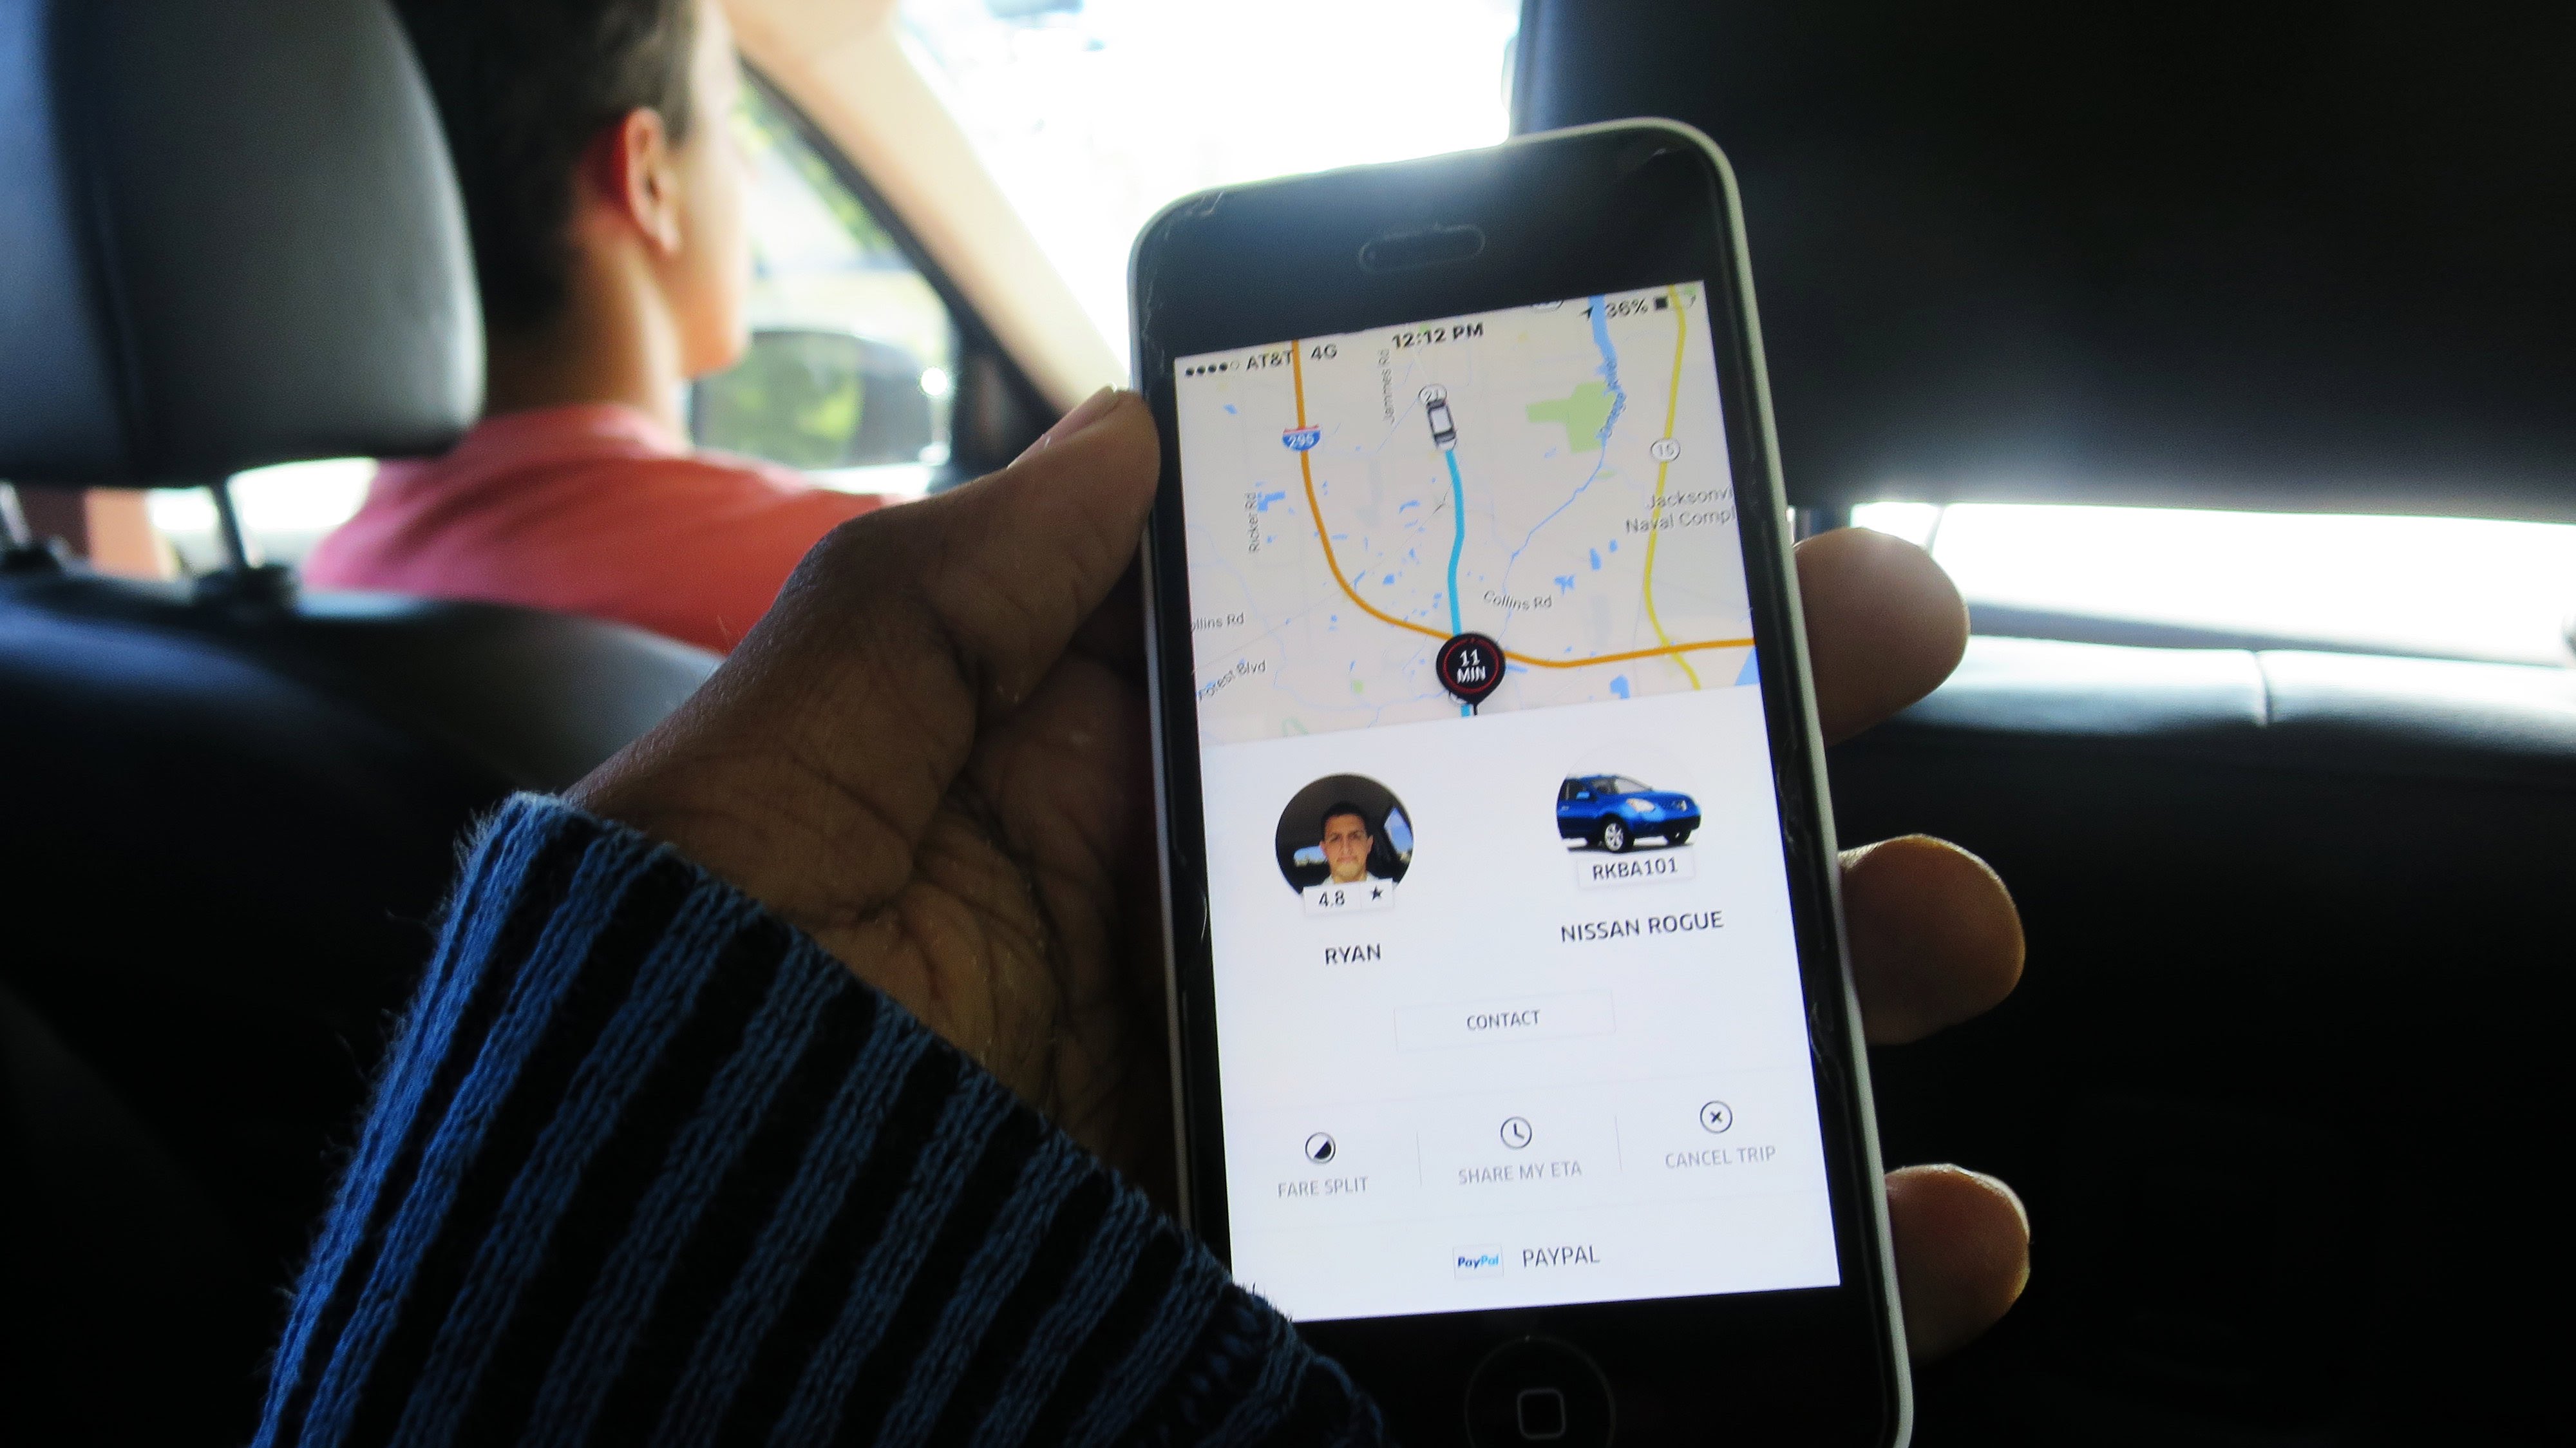 Dutch startup news update: Tiqets, Shake-on, the end of ‘Uber for X’